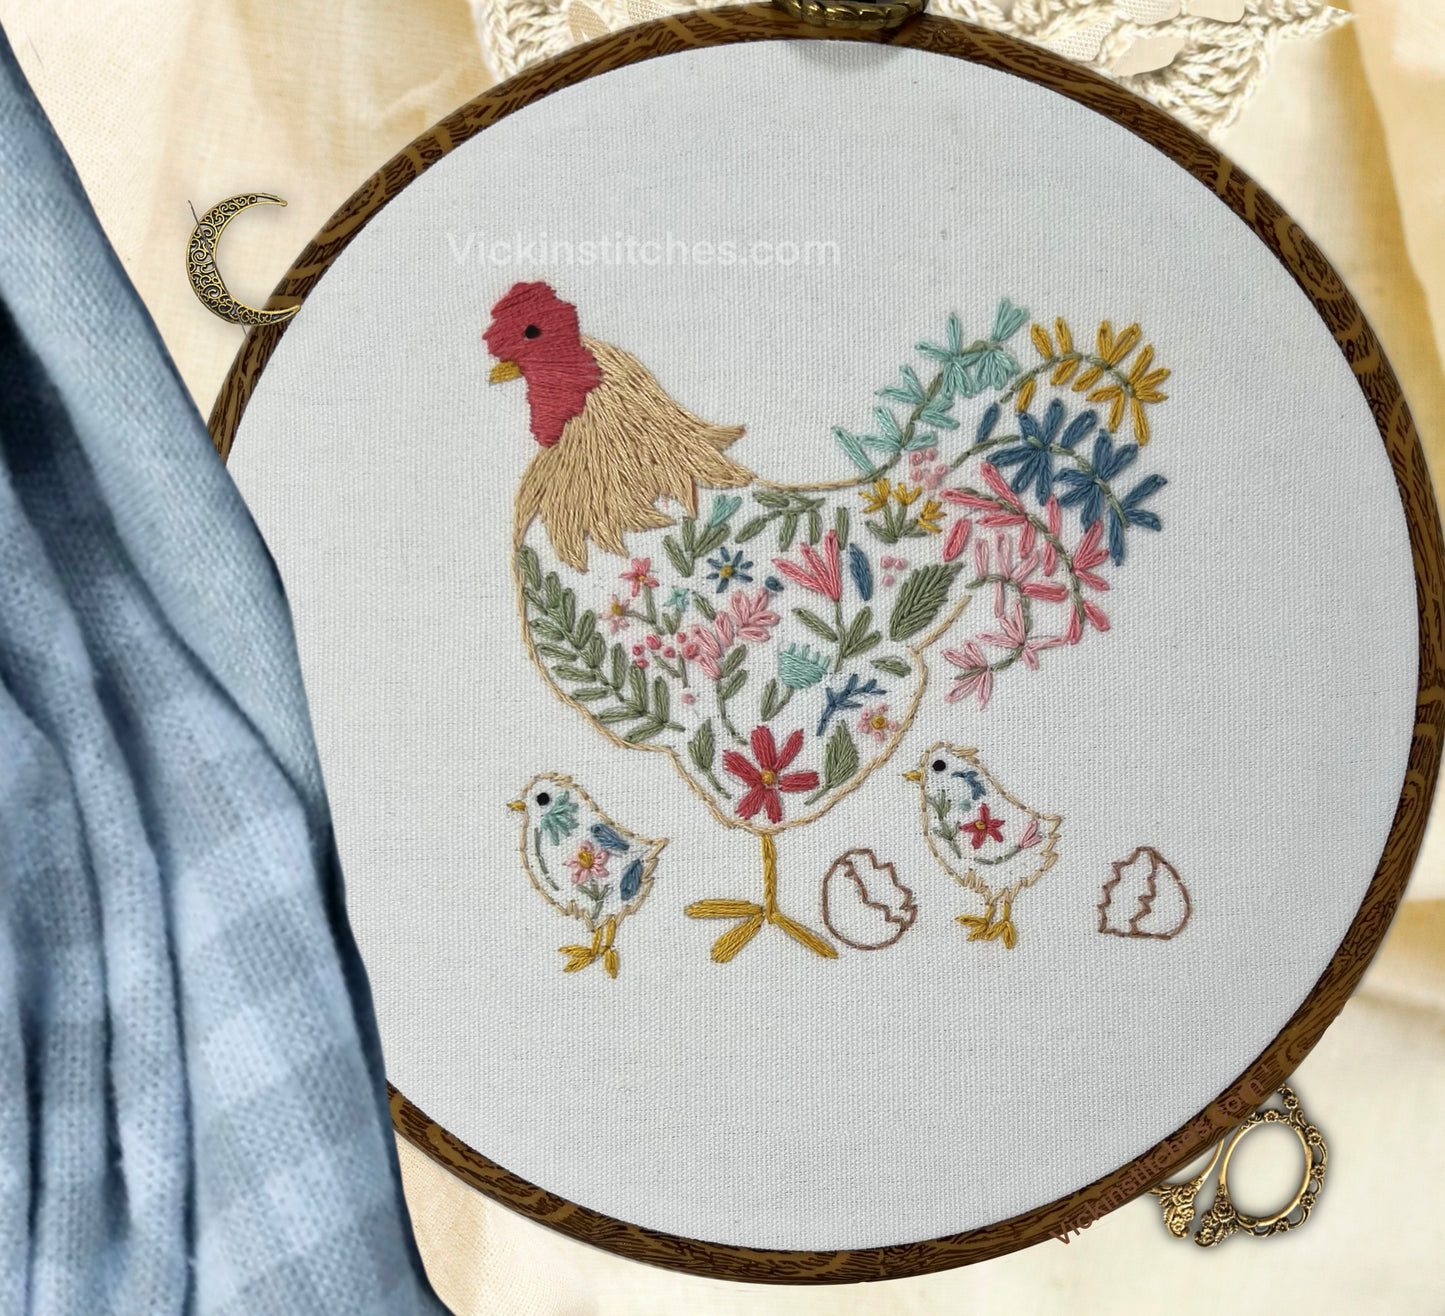 Chicken family sampler, hen and chicks  embroidery kit for beginners, fun simple embroidery